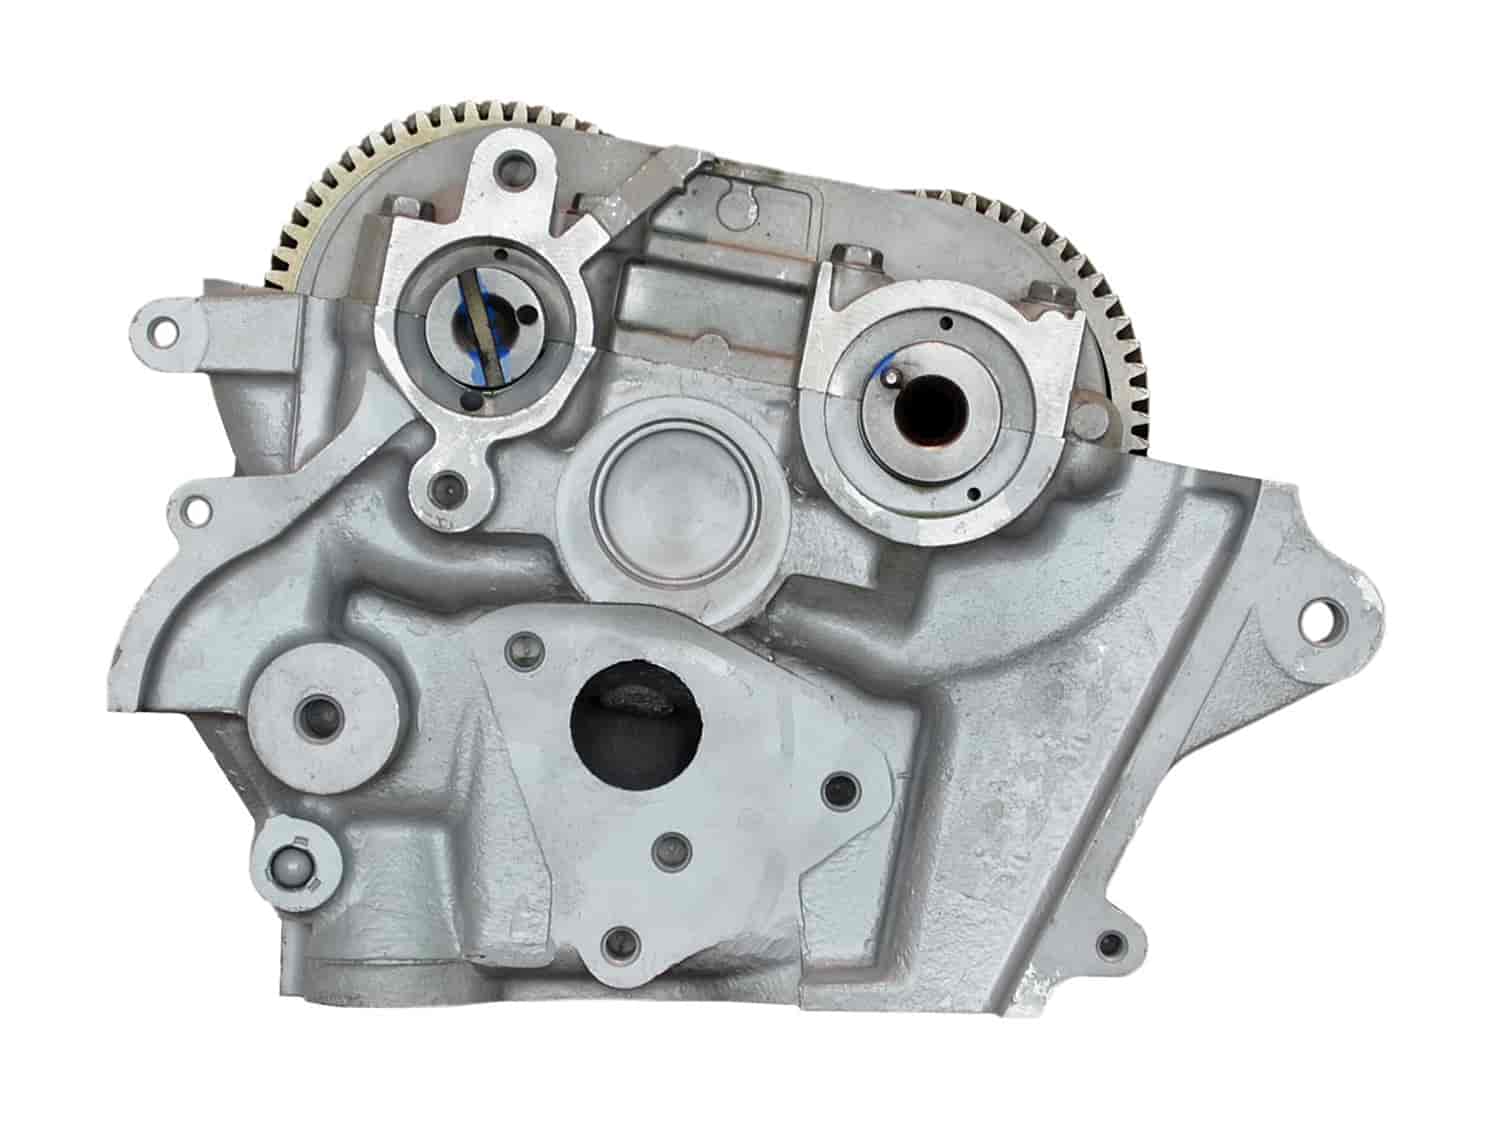 Remanufactured Cylinder Head for 1995-2002 Mazda Millenia with 2.3L V6